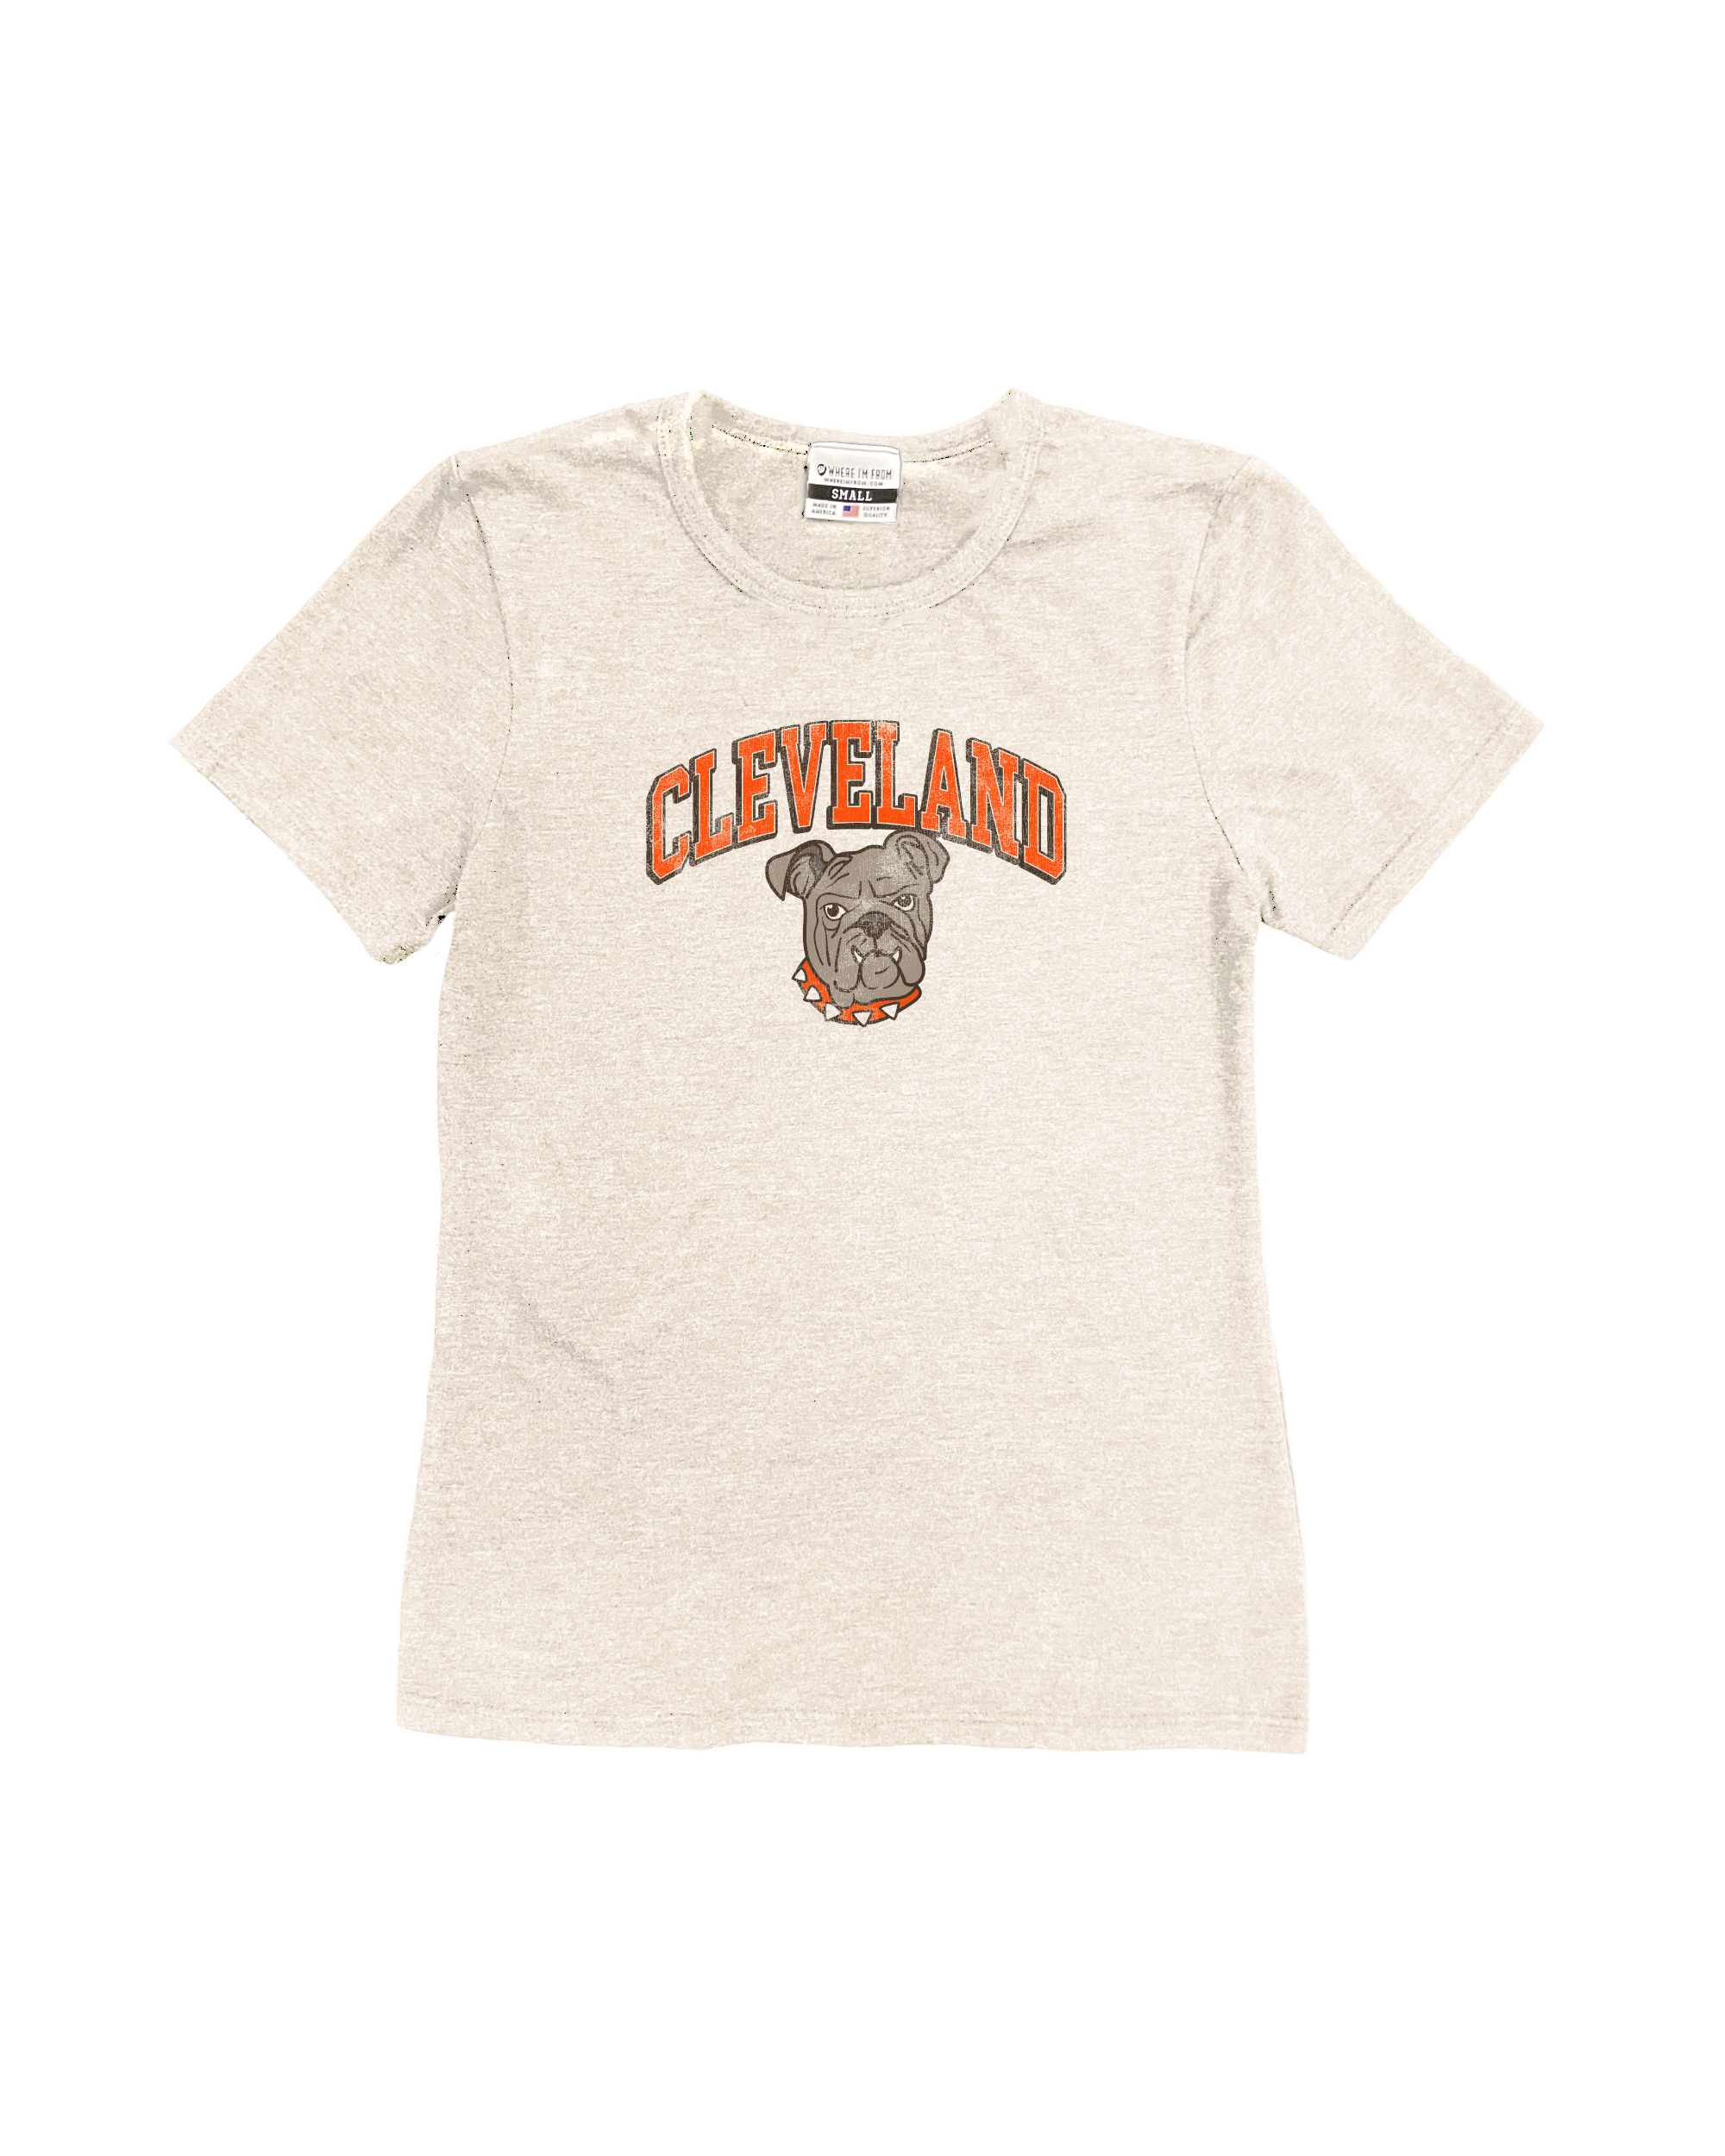 Cle Arch Dog Women’s T-shirt